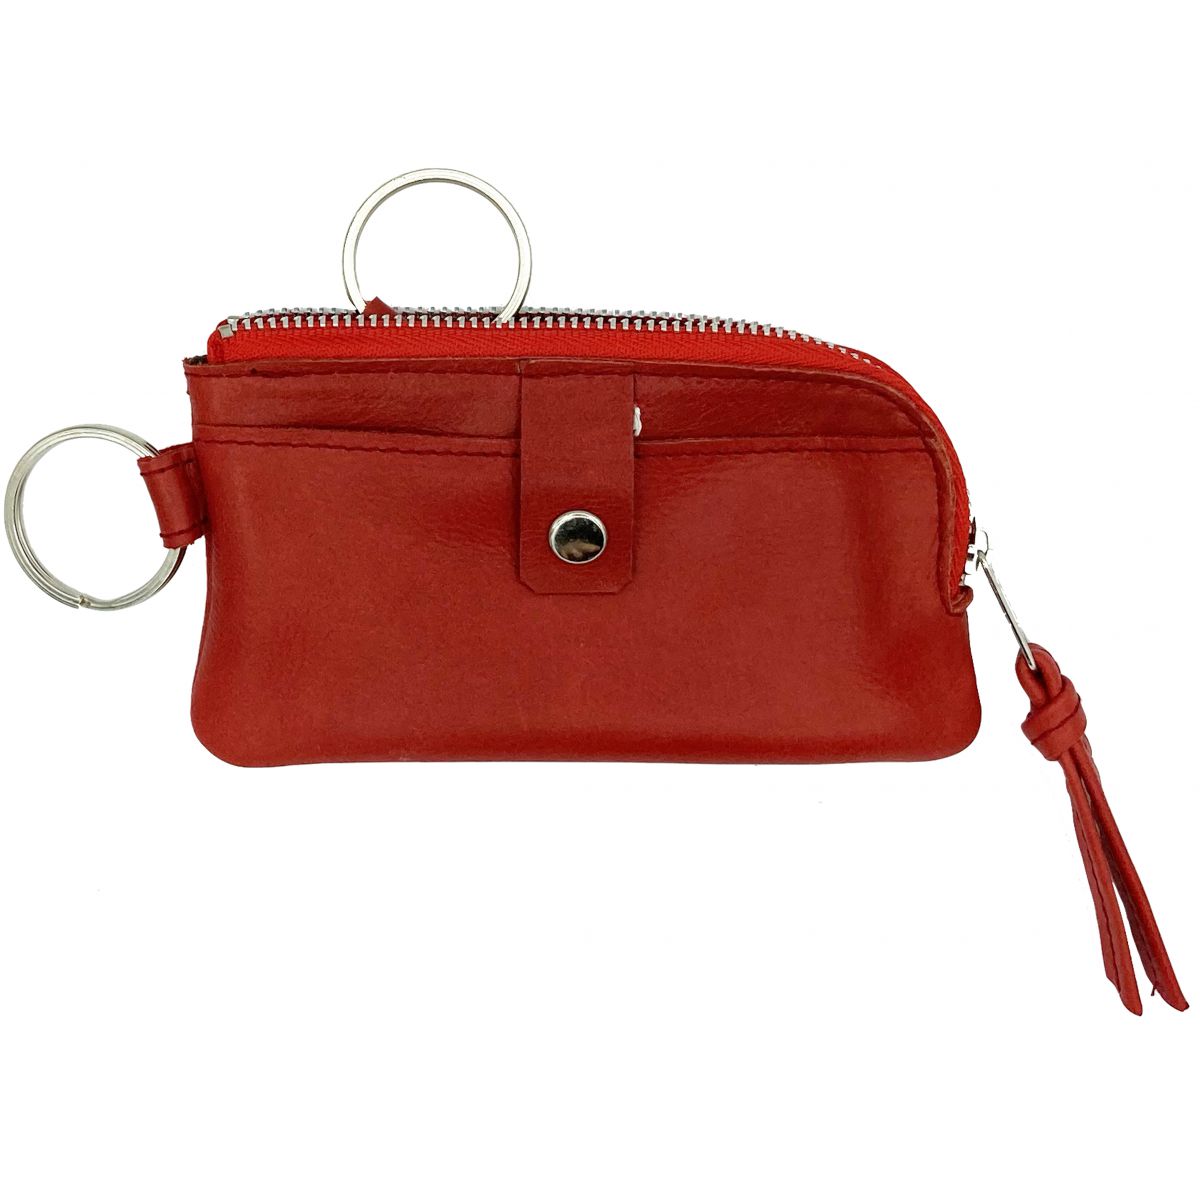 The leather key wallet Bollo | A leather key wallet